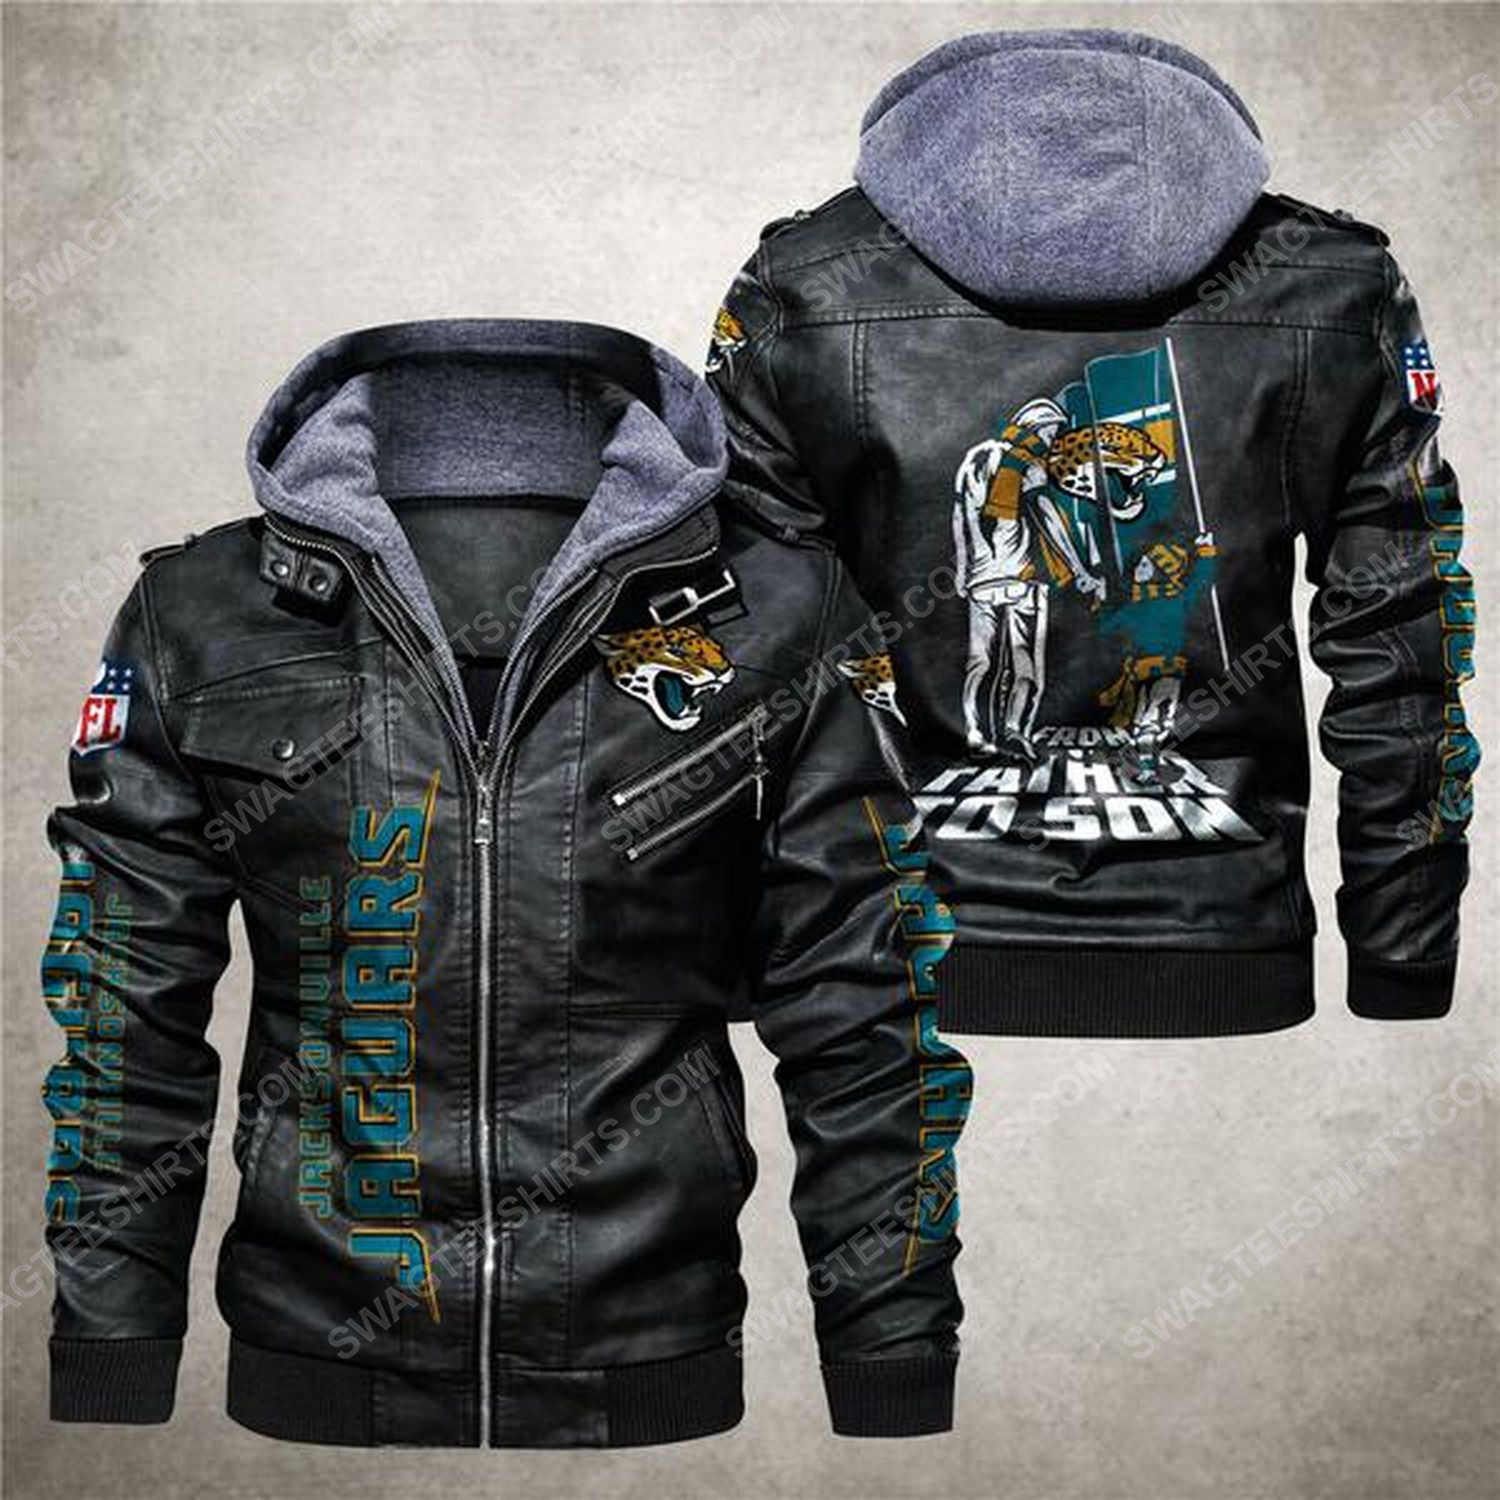 [special edition] National football league jacksonville jaguars from father to son leather jacket – Maria